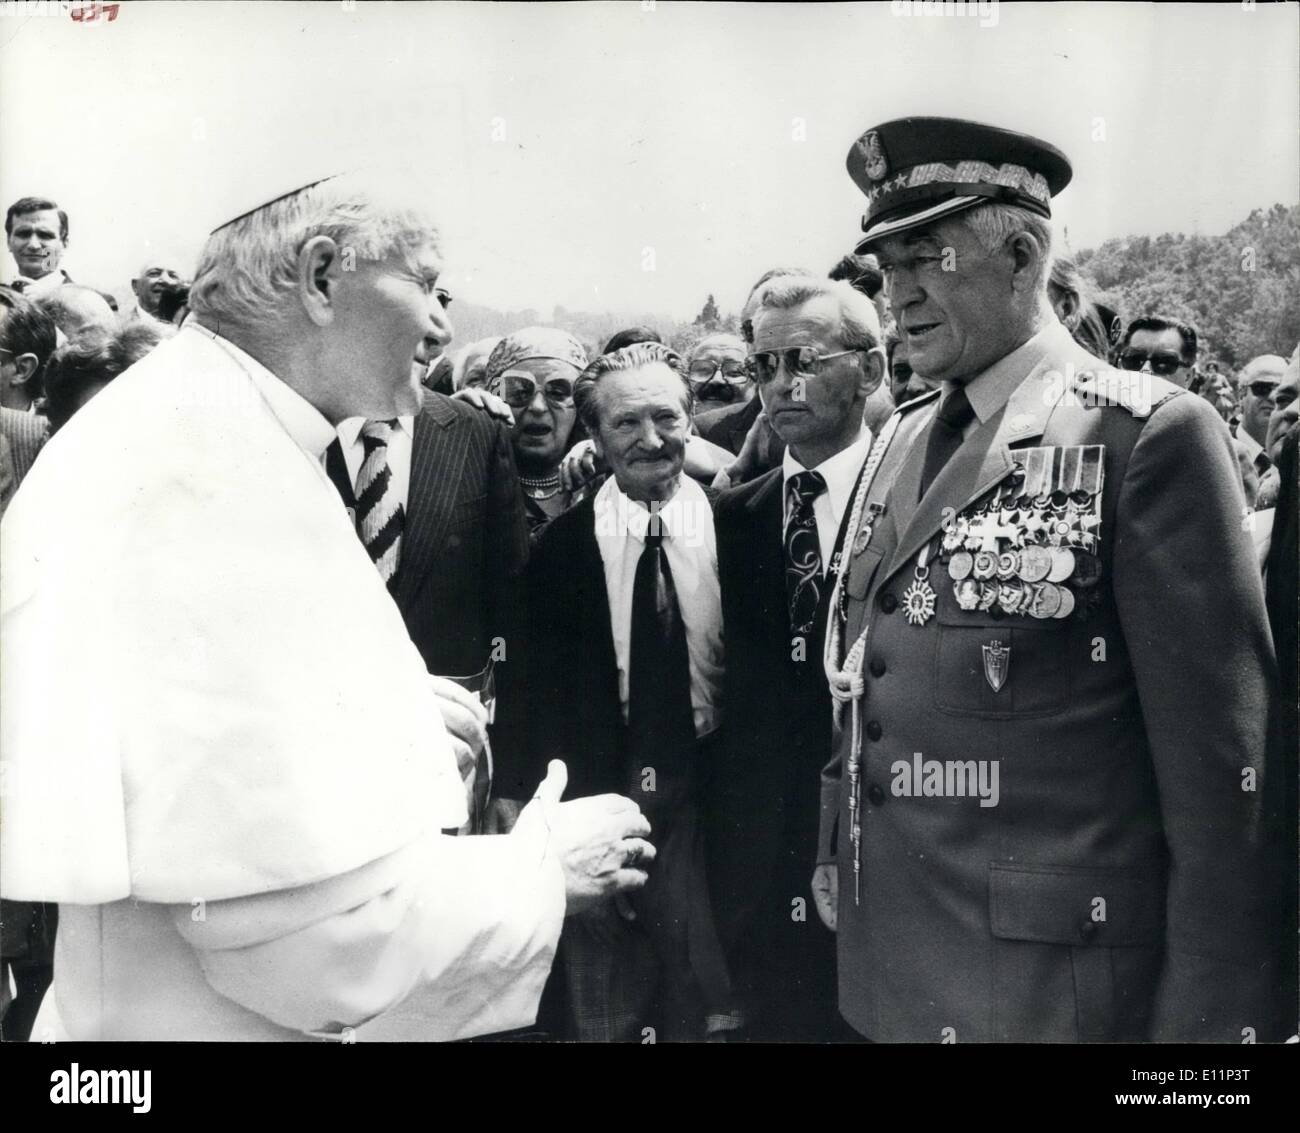 May 05, 1979 - THE POPE'S PILGRIMAGE TO MONTE CASSINO. 35 years since the battle and the fall of Monte Cassino, in which countless thousands of British, German and Polish soldiers died, pope John Paul II flew over the historic site in his helicopter, to pay tribute to his Polish country who perished there. He visited the abbey, and then held marsamid the gaves of 1,000 polish soldiers who fell in the seven-day battle. PHOTO SHOWS: Pope John Paul seen talking to STEFAN SOBONIEWSKY, who at Monte Cassino was a tank major with the Polish 2nd Division Stock Photo